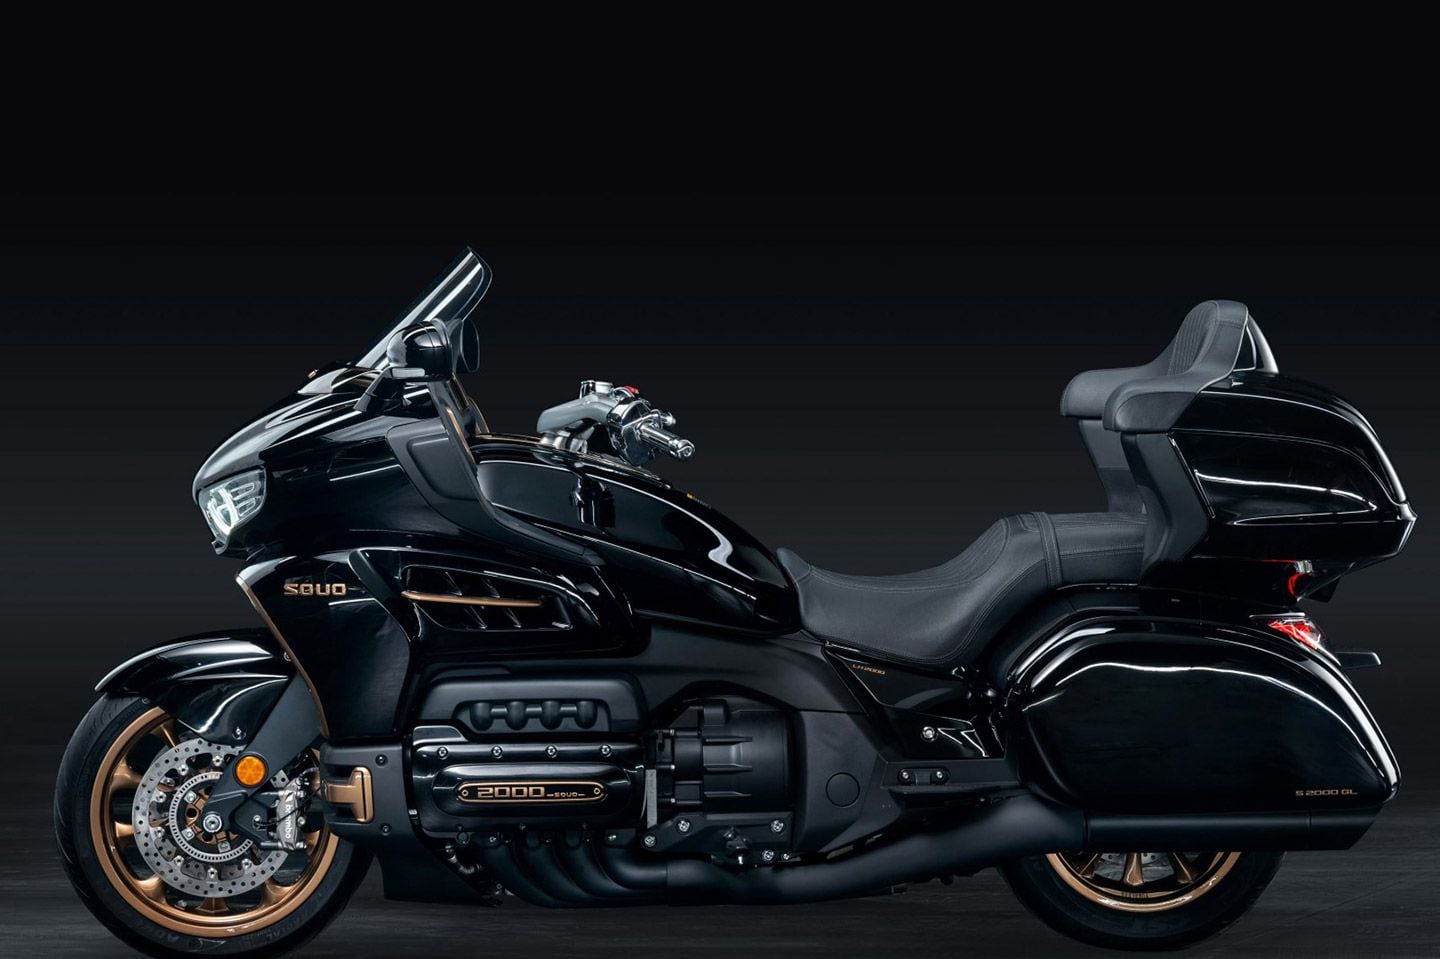 GWM Souo’s first offering is this Honda Gold Wing competitor called the S2000 GL.